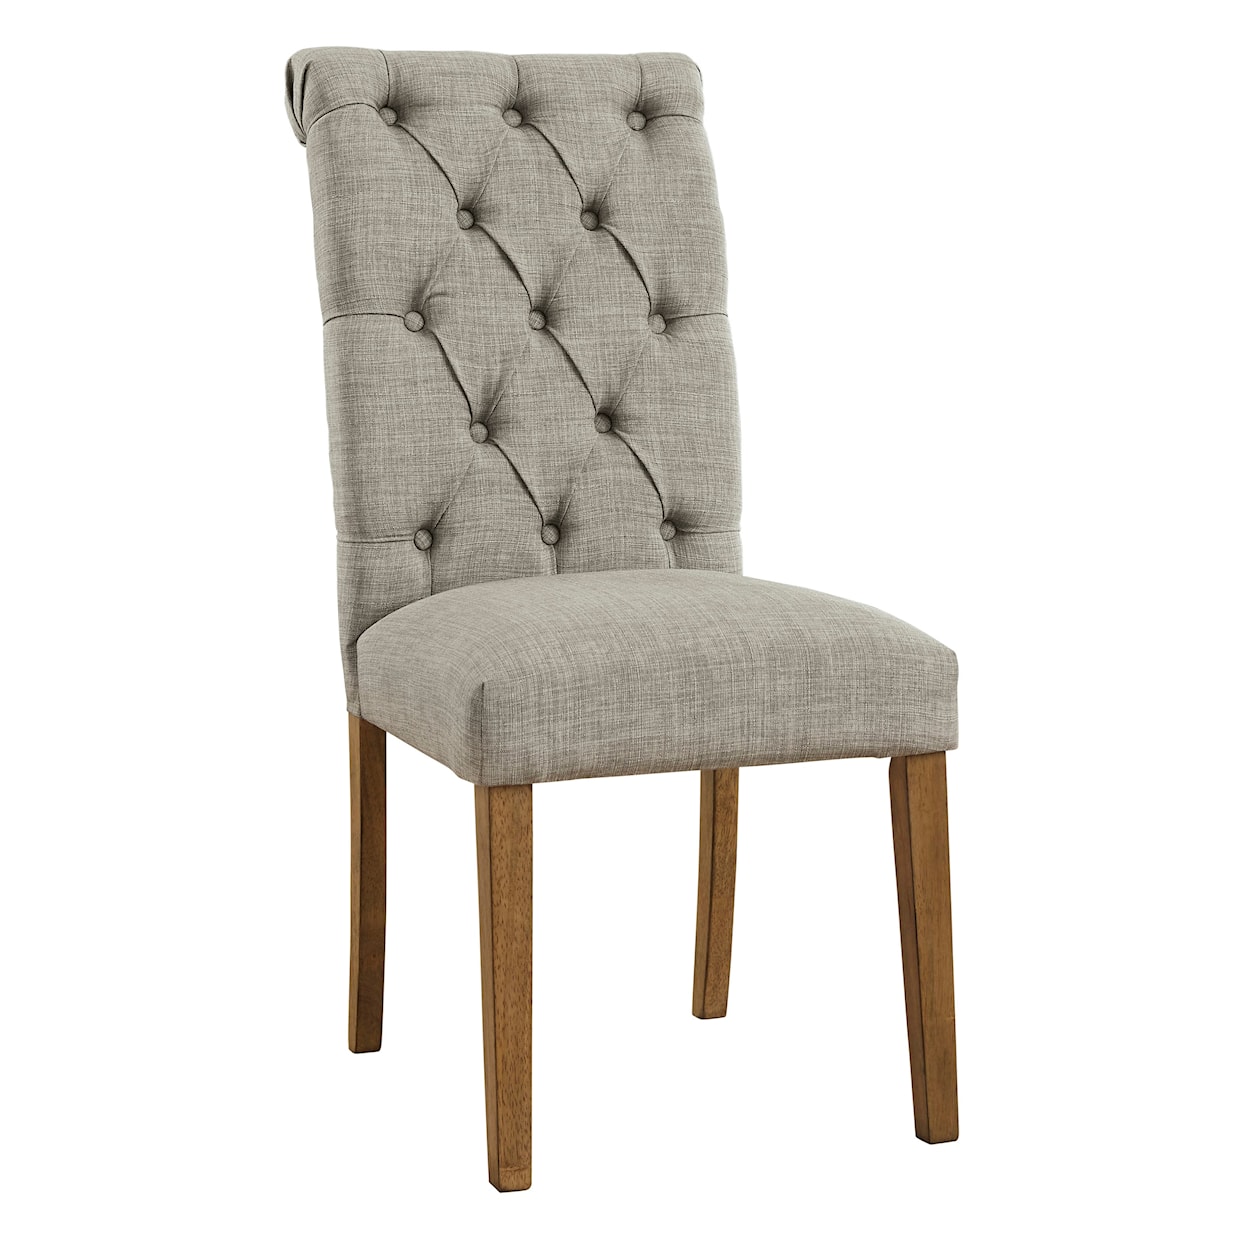 Benchcraft Harvina Dining Chair